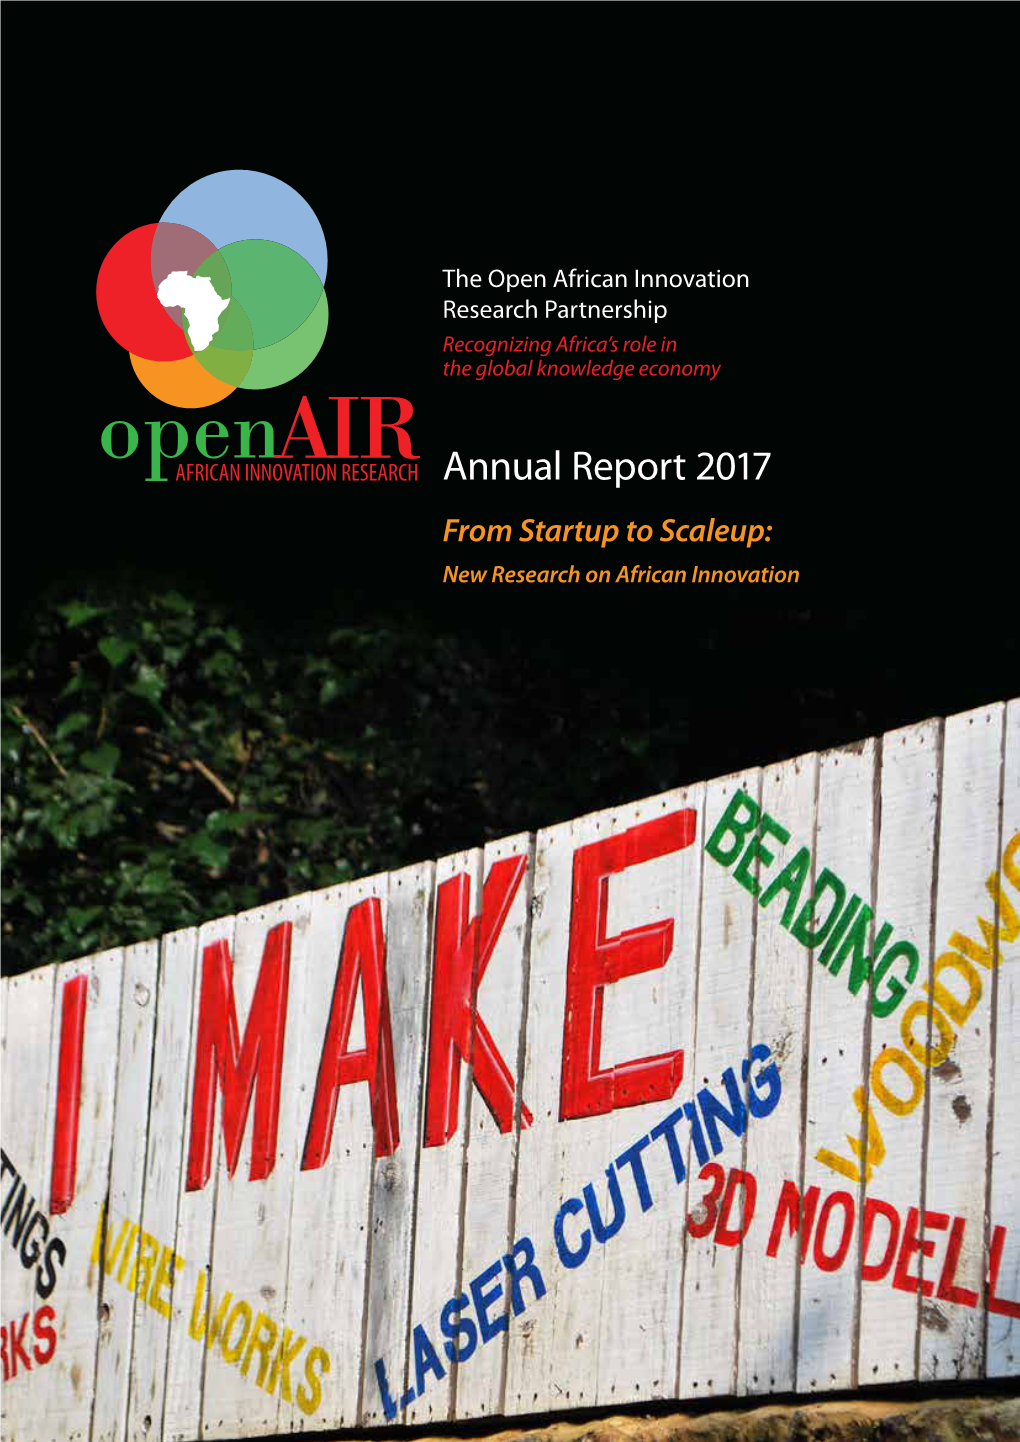 Annual Report 2017 from Startup to Scaleup: New Research on African Innovation Open African Innovation Research Partnership Annual Report 2017 Contents